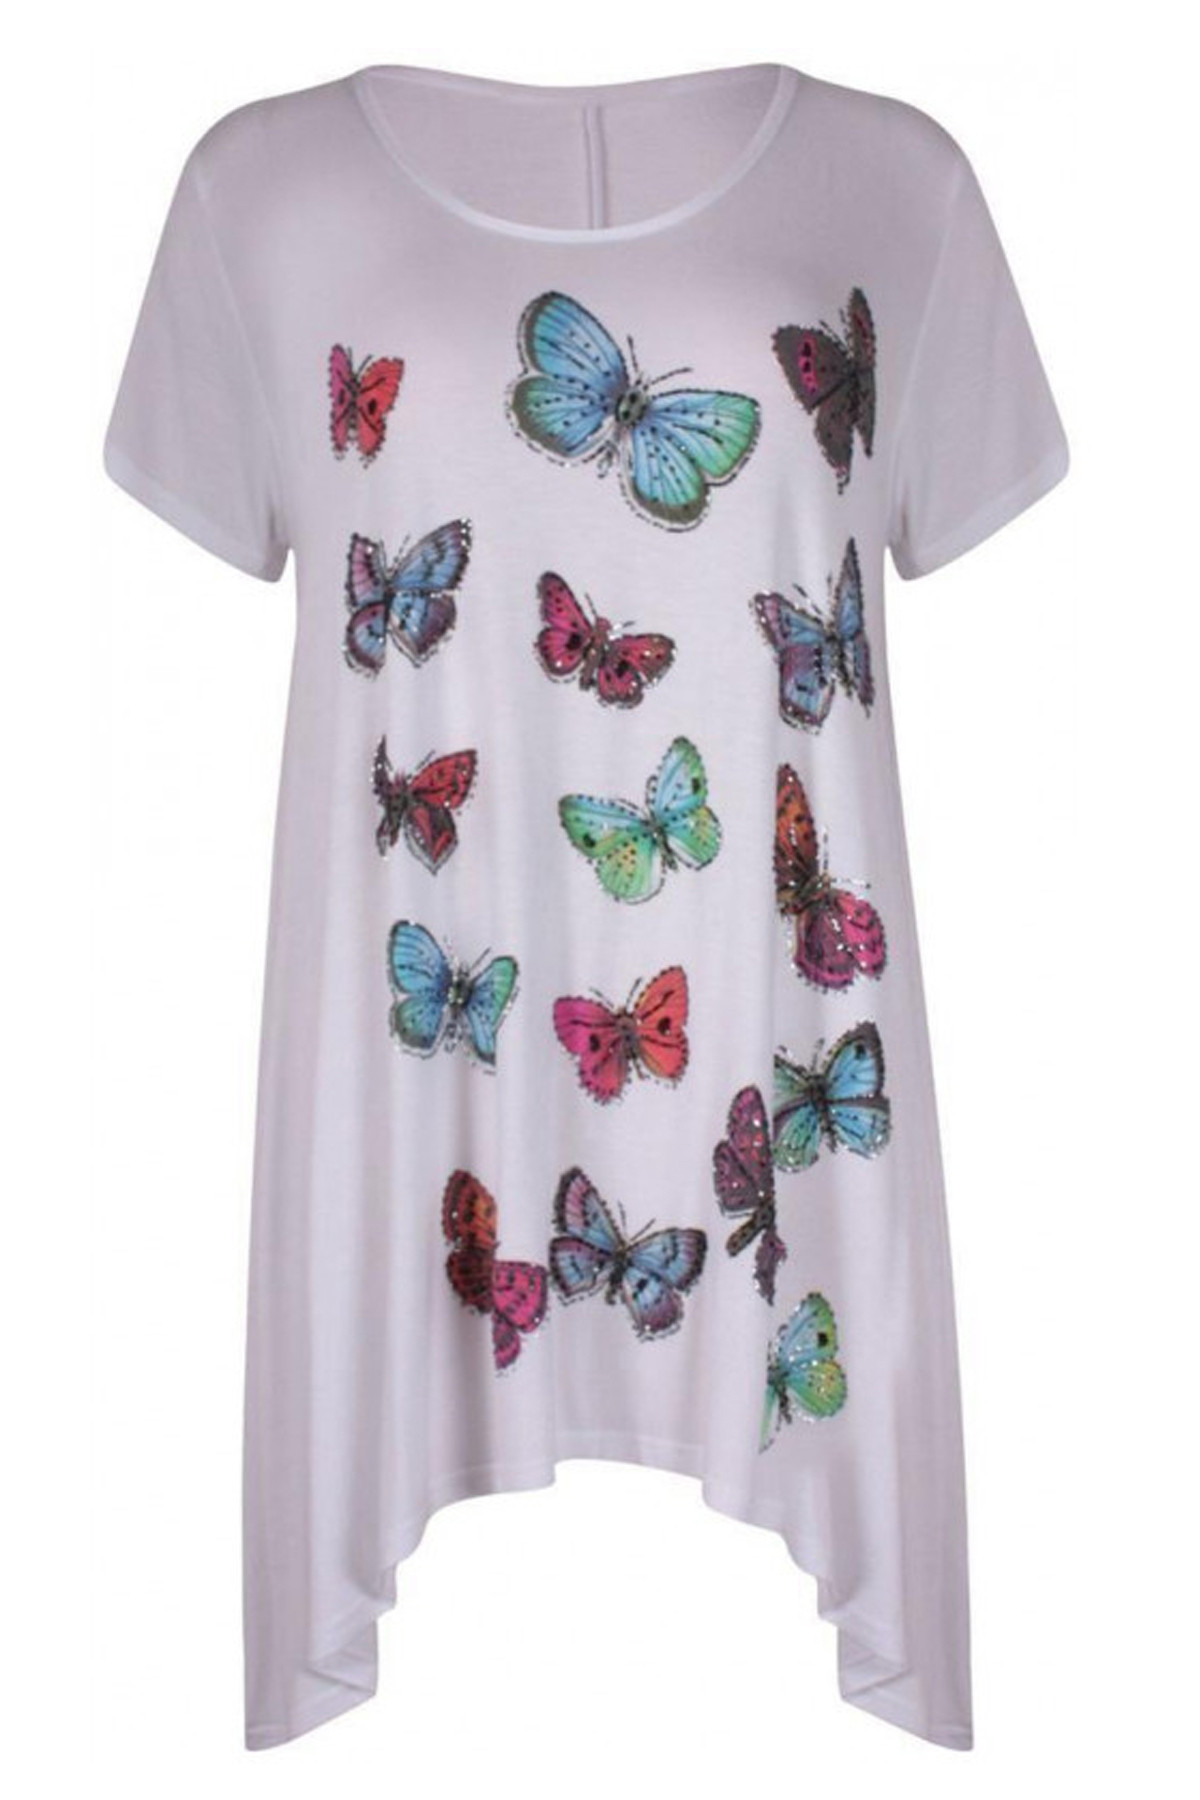 New Womens Hanky Hem Tops Graphic Floral Sequin Butterfly Print Tunic Top 8-26 